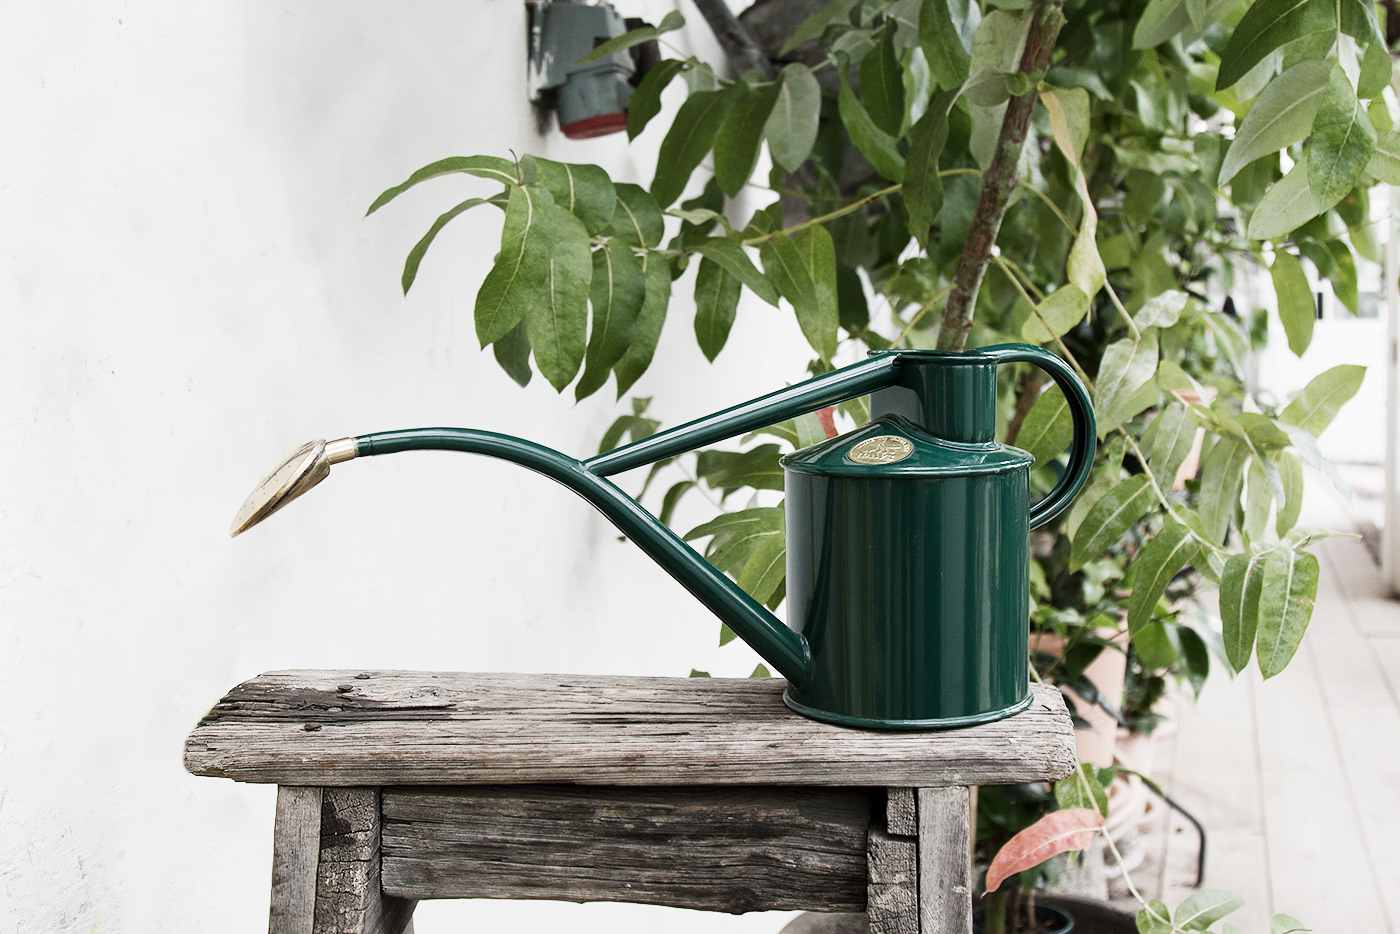 Beautiful objects for the not so green thumbs that will make them want to start gardening